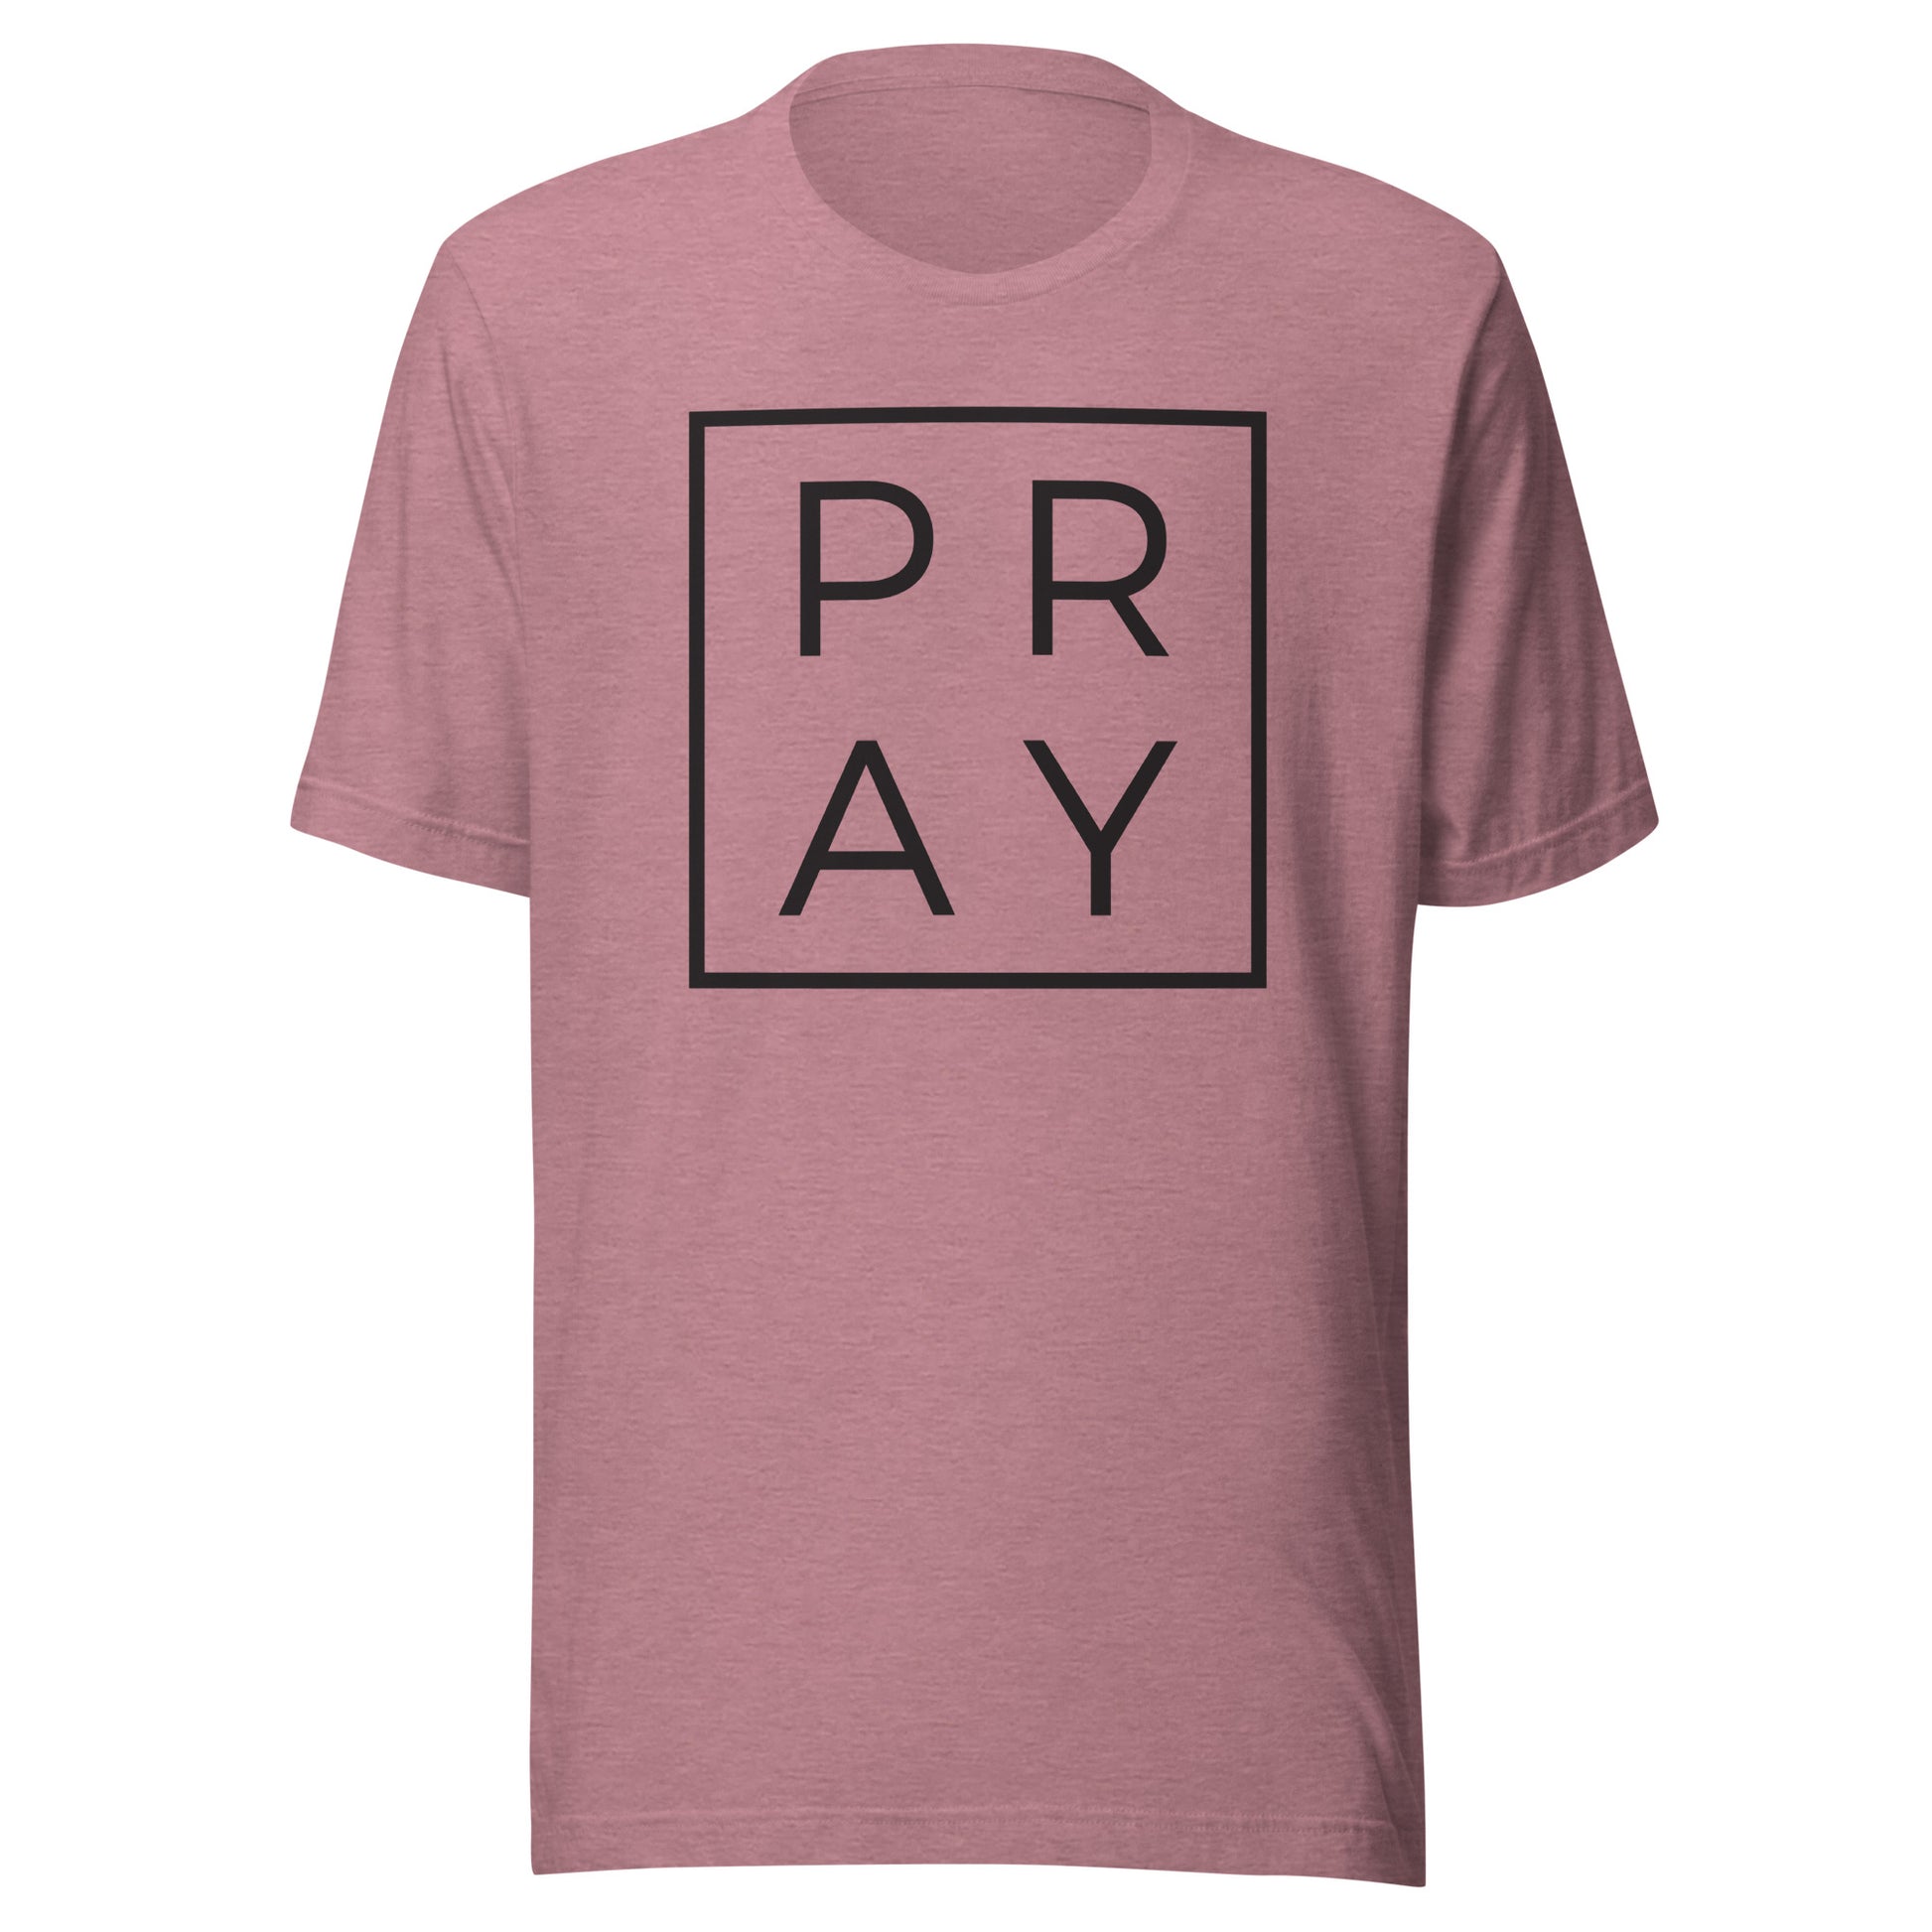 Discover the Power of Prayer with our "Pray" Bella Canvas Tee